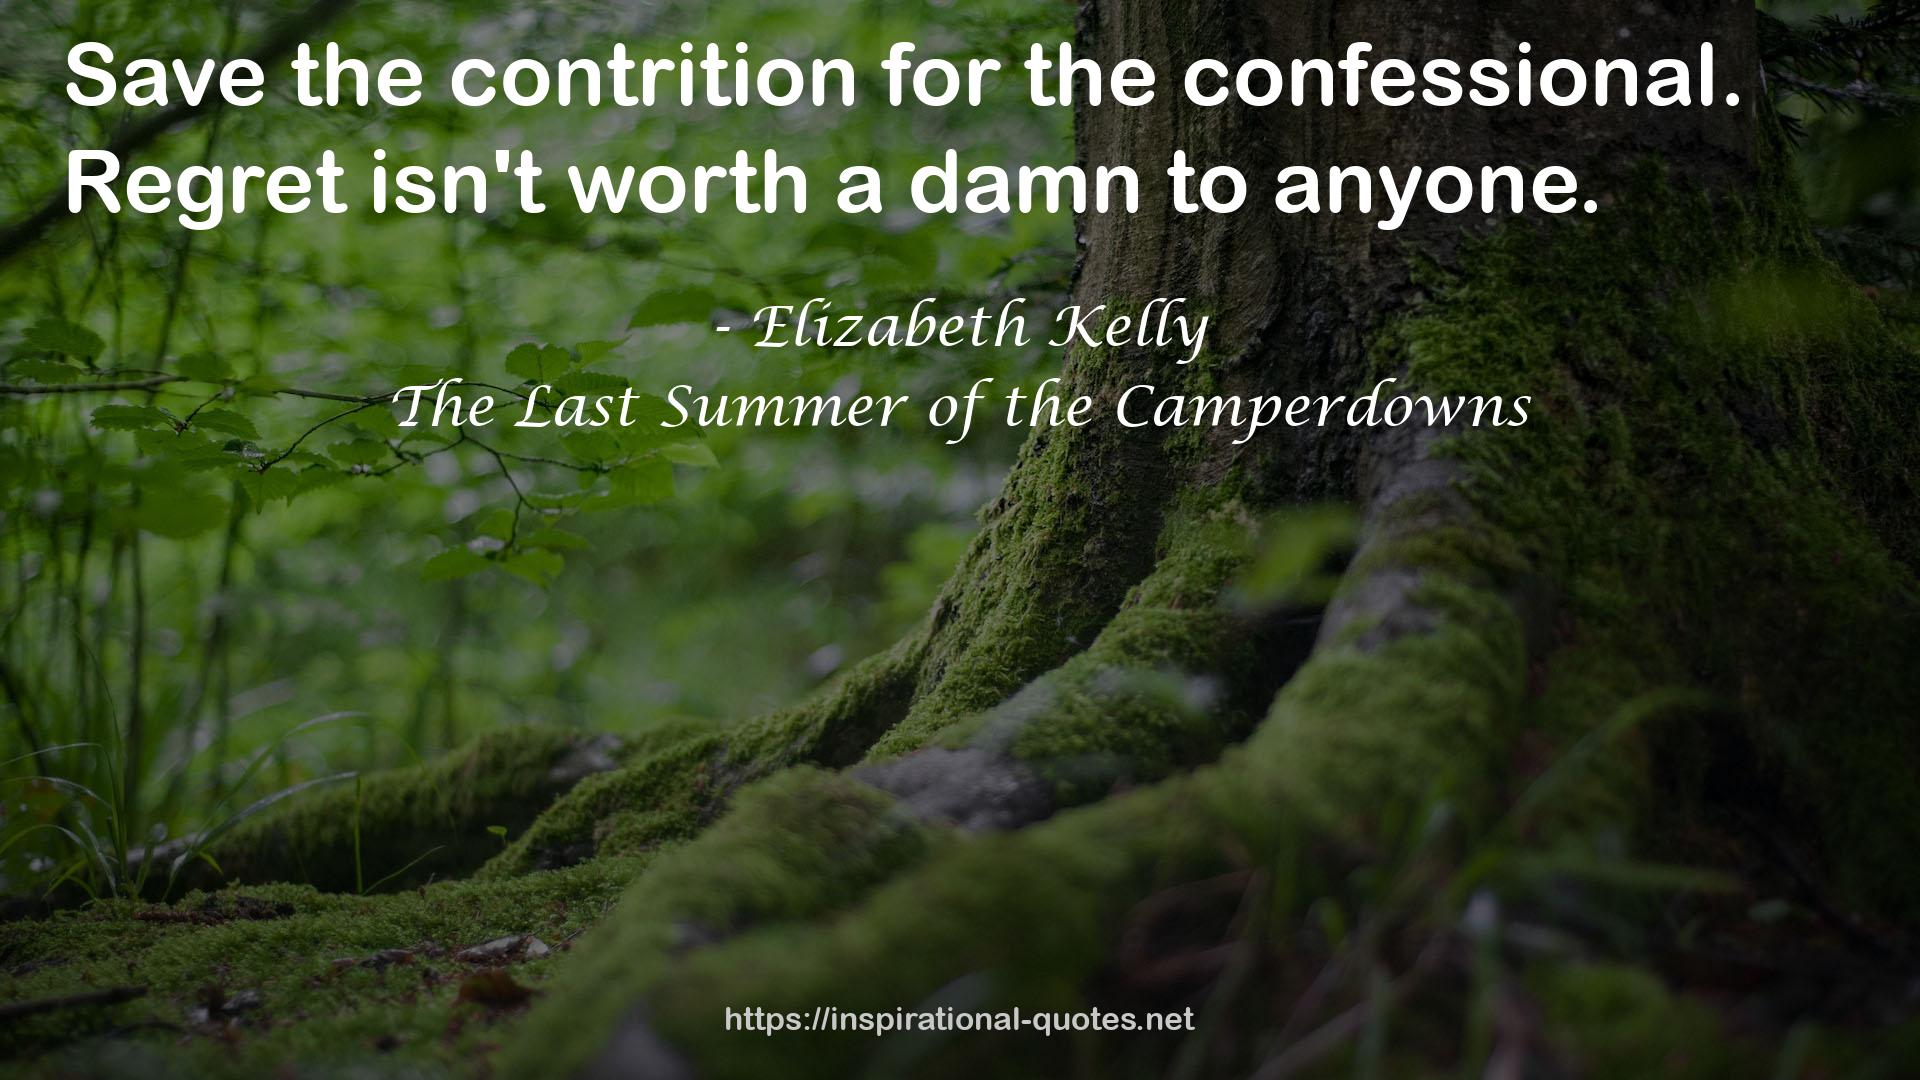 The Last Summer of the Camperdowns QUOTES